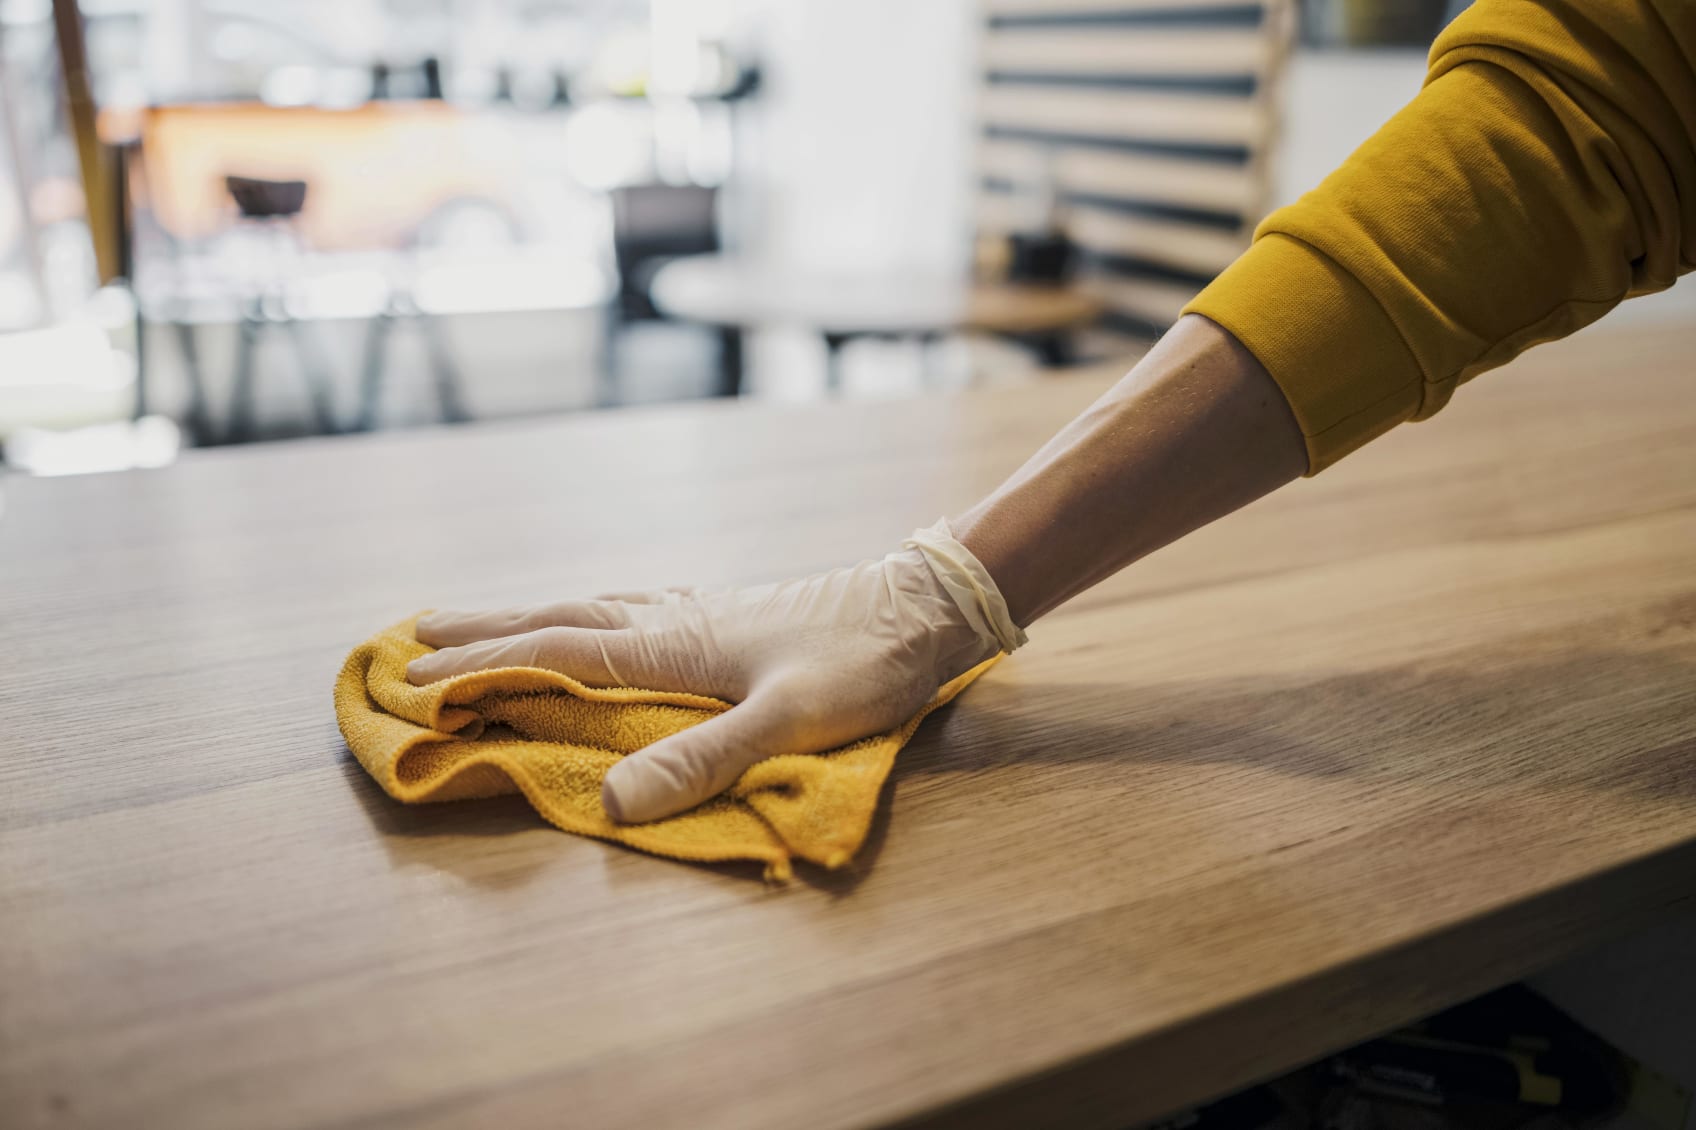 A gloved hand wipes down a wood table with a rag